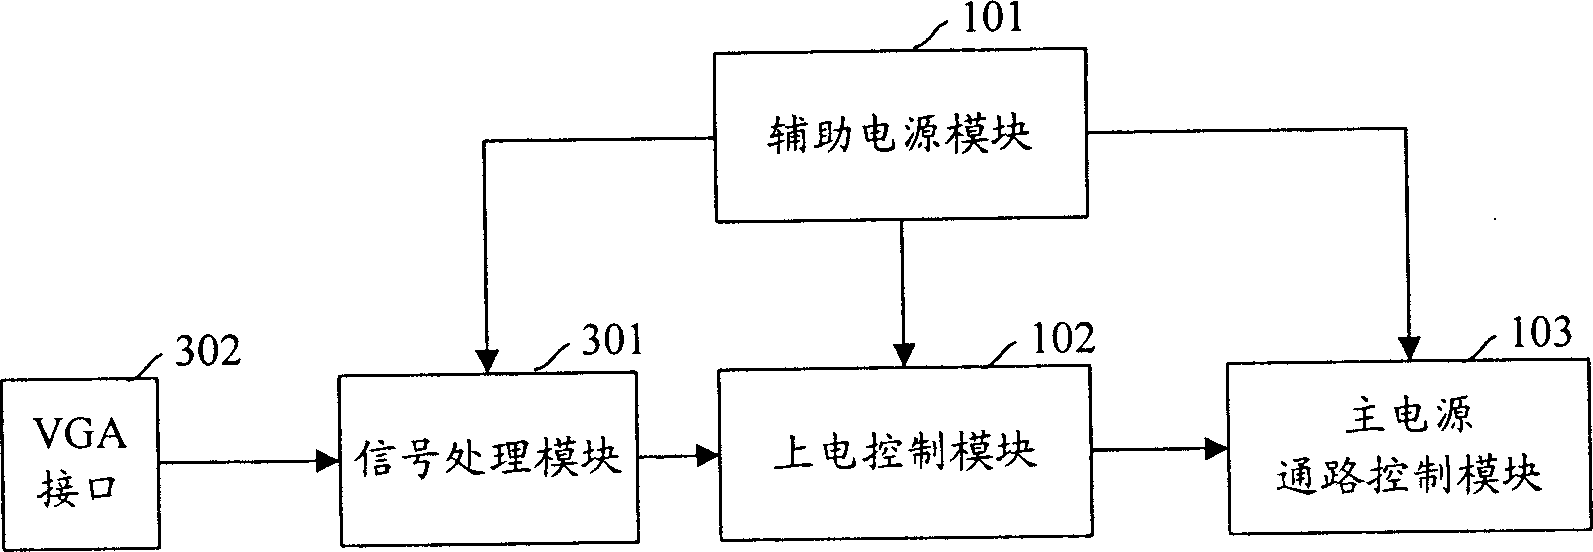 Apparatus and method for controlling master power supply of display device